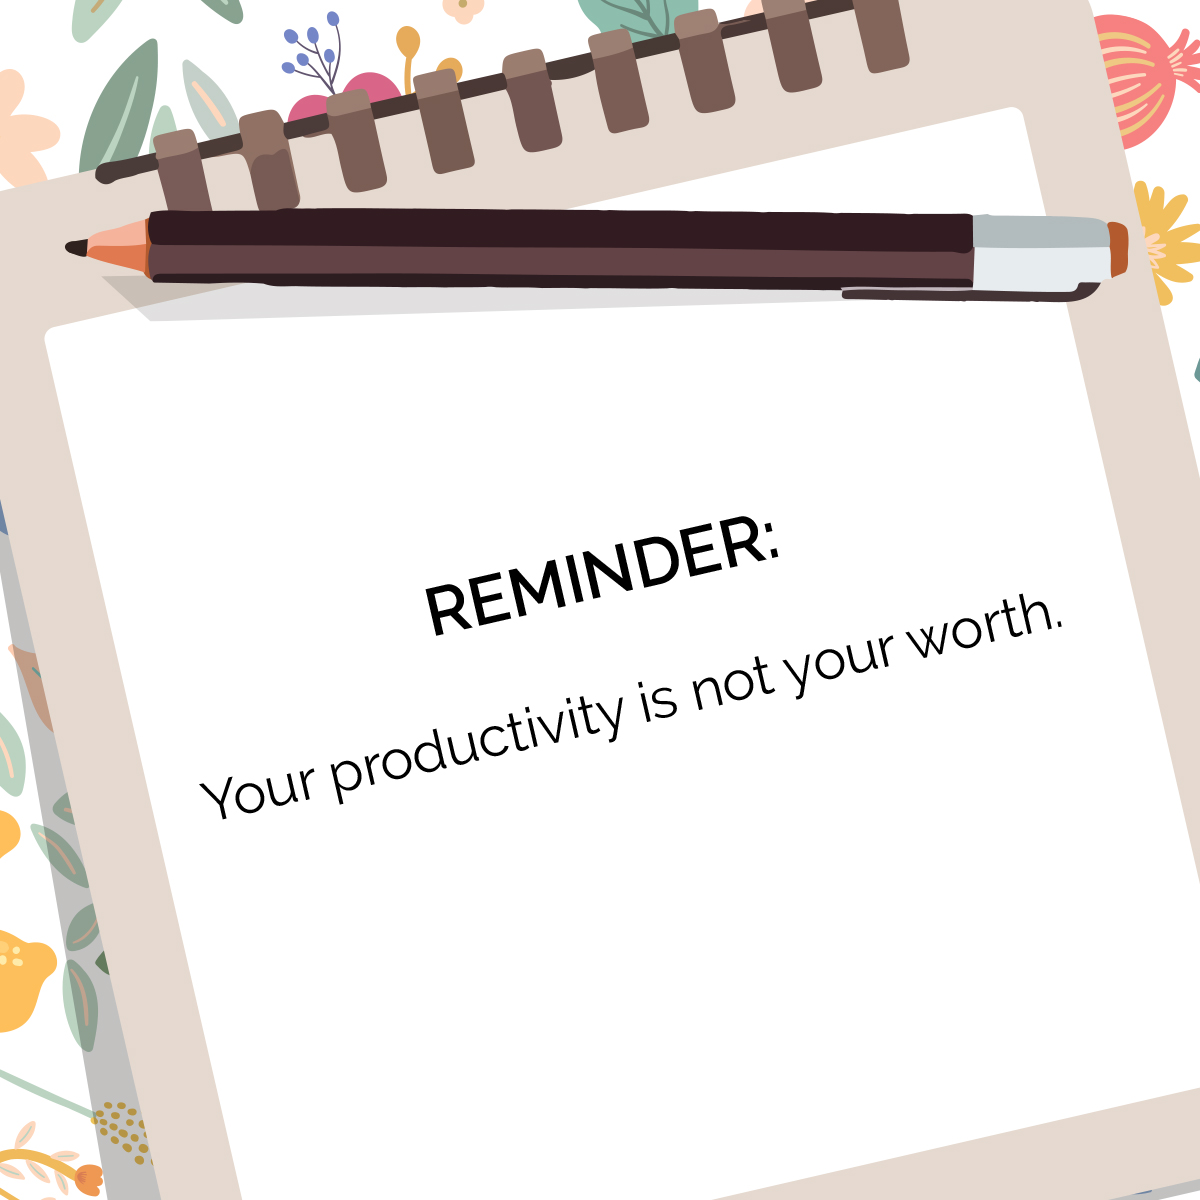 Time to remember #BeautyBosses: Your productivity is NOT your worth! Your value goes way beyond that to-do list.  📝 

#MondayMindset #SelfWorthMatters